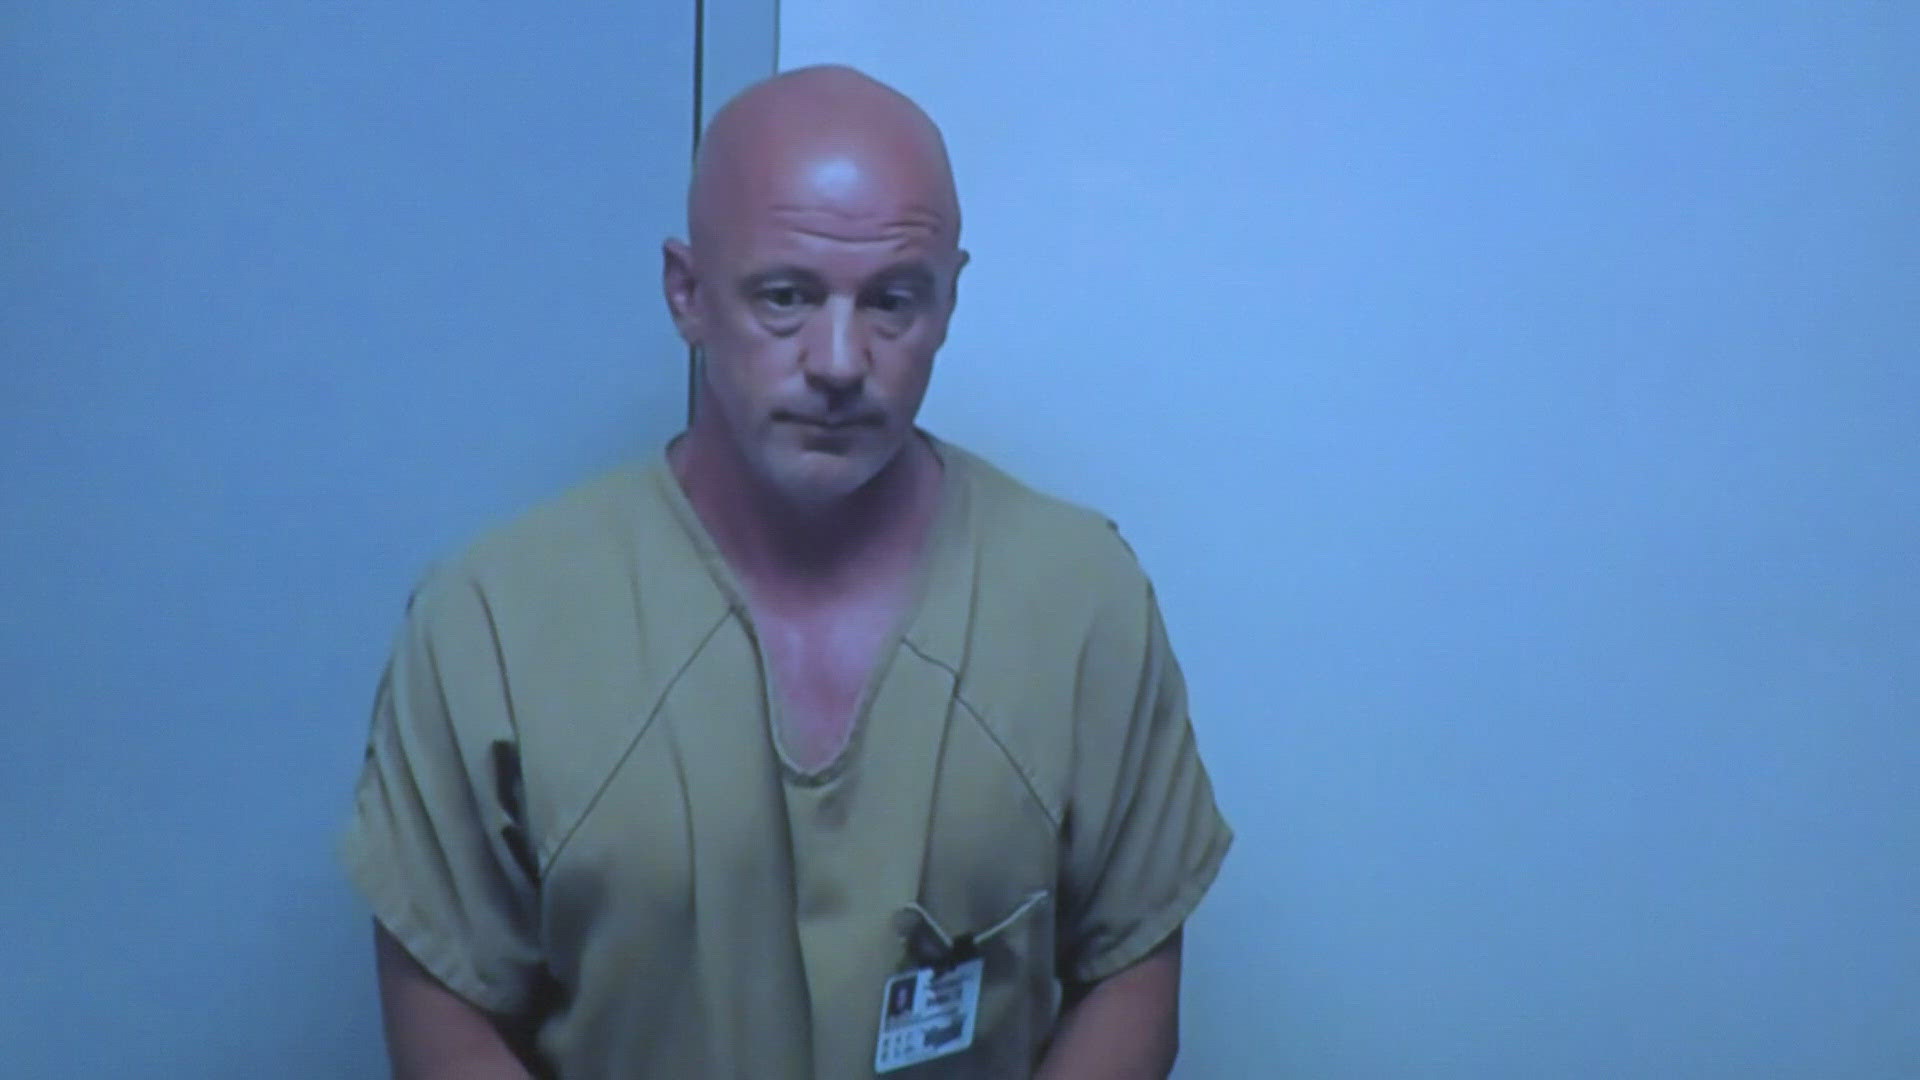 Franklin County Court Municipal Court documents say 46-year-old Anthony Aiello is charged with sexual imposition, telephone harassment and public indecency.